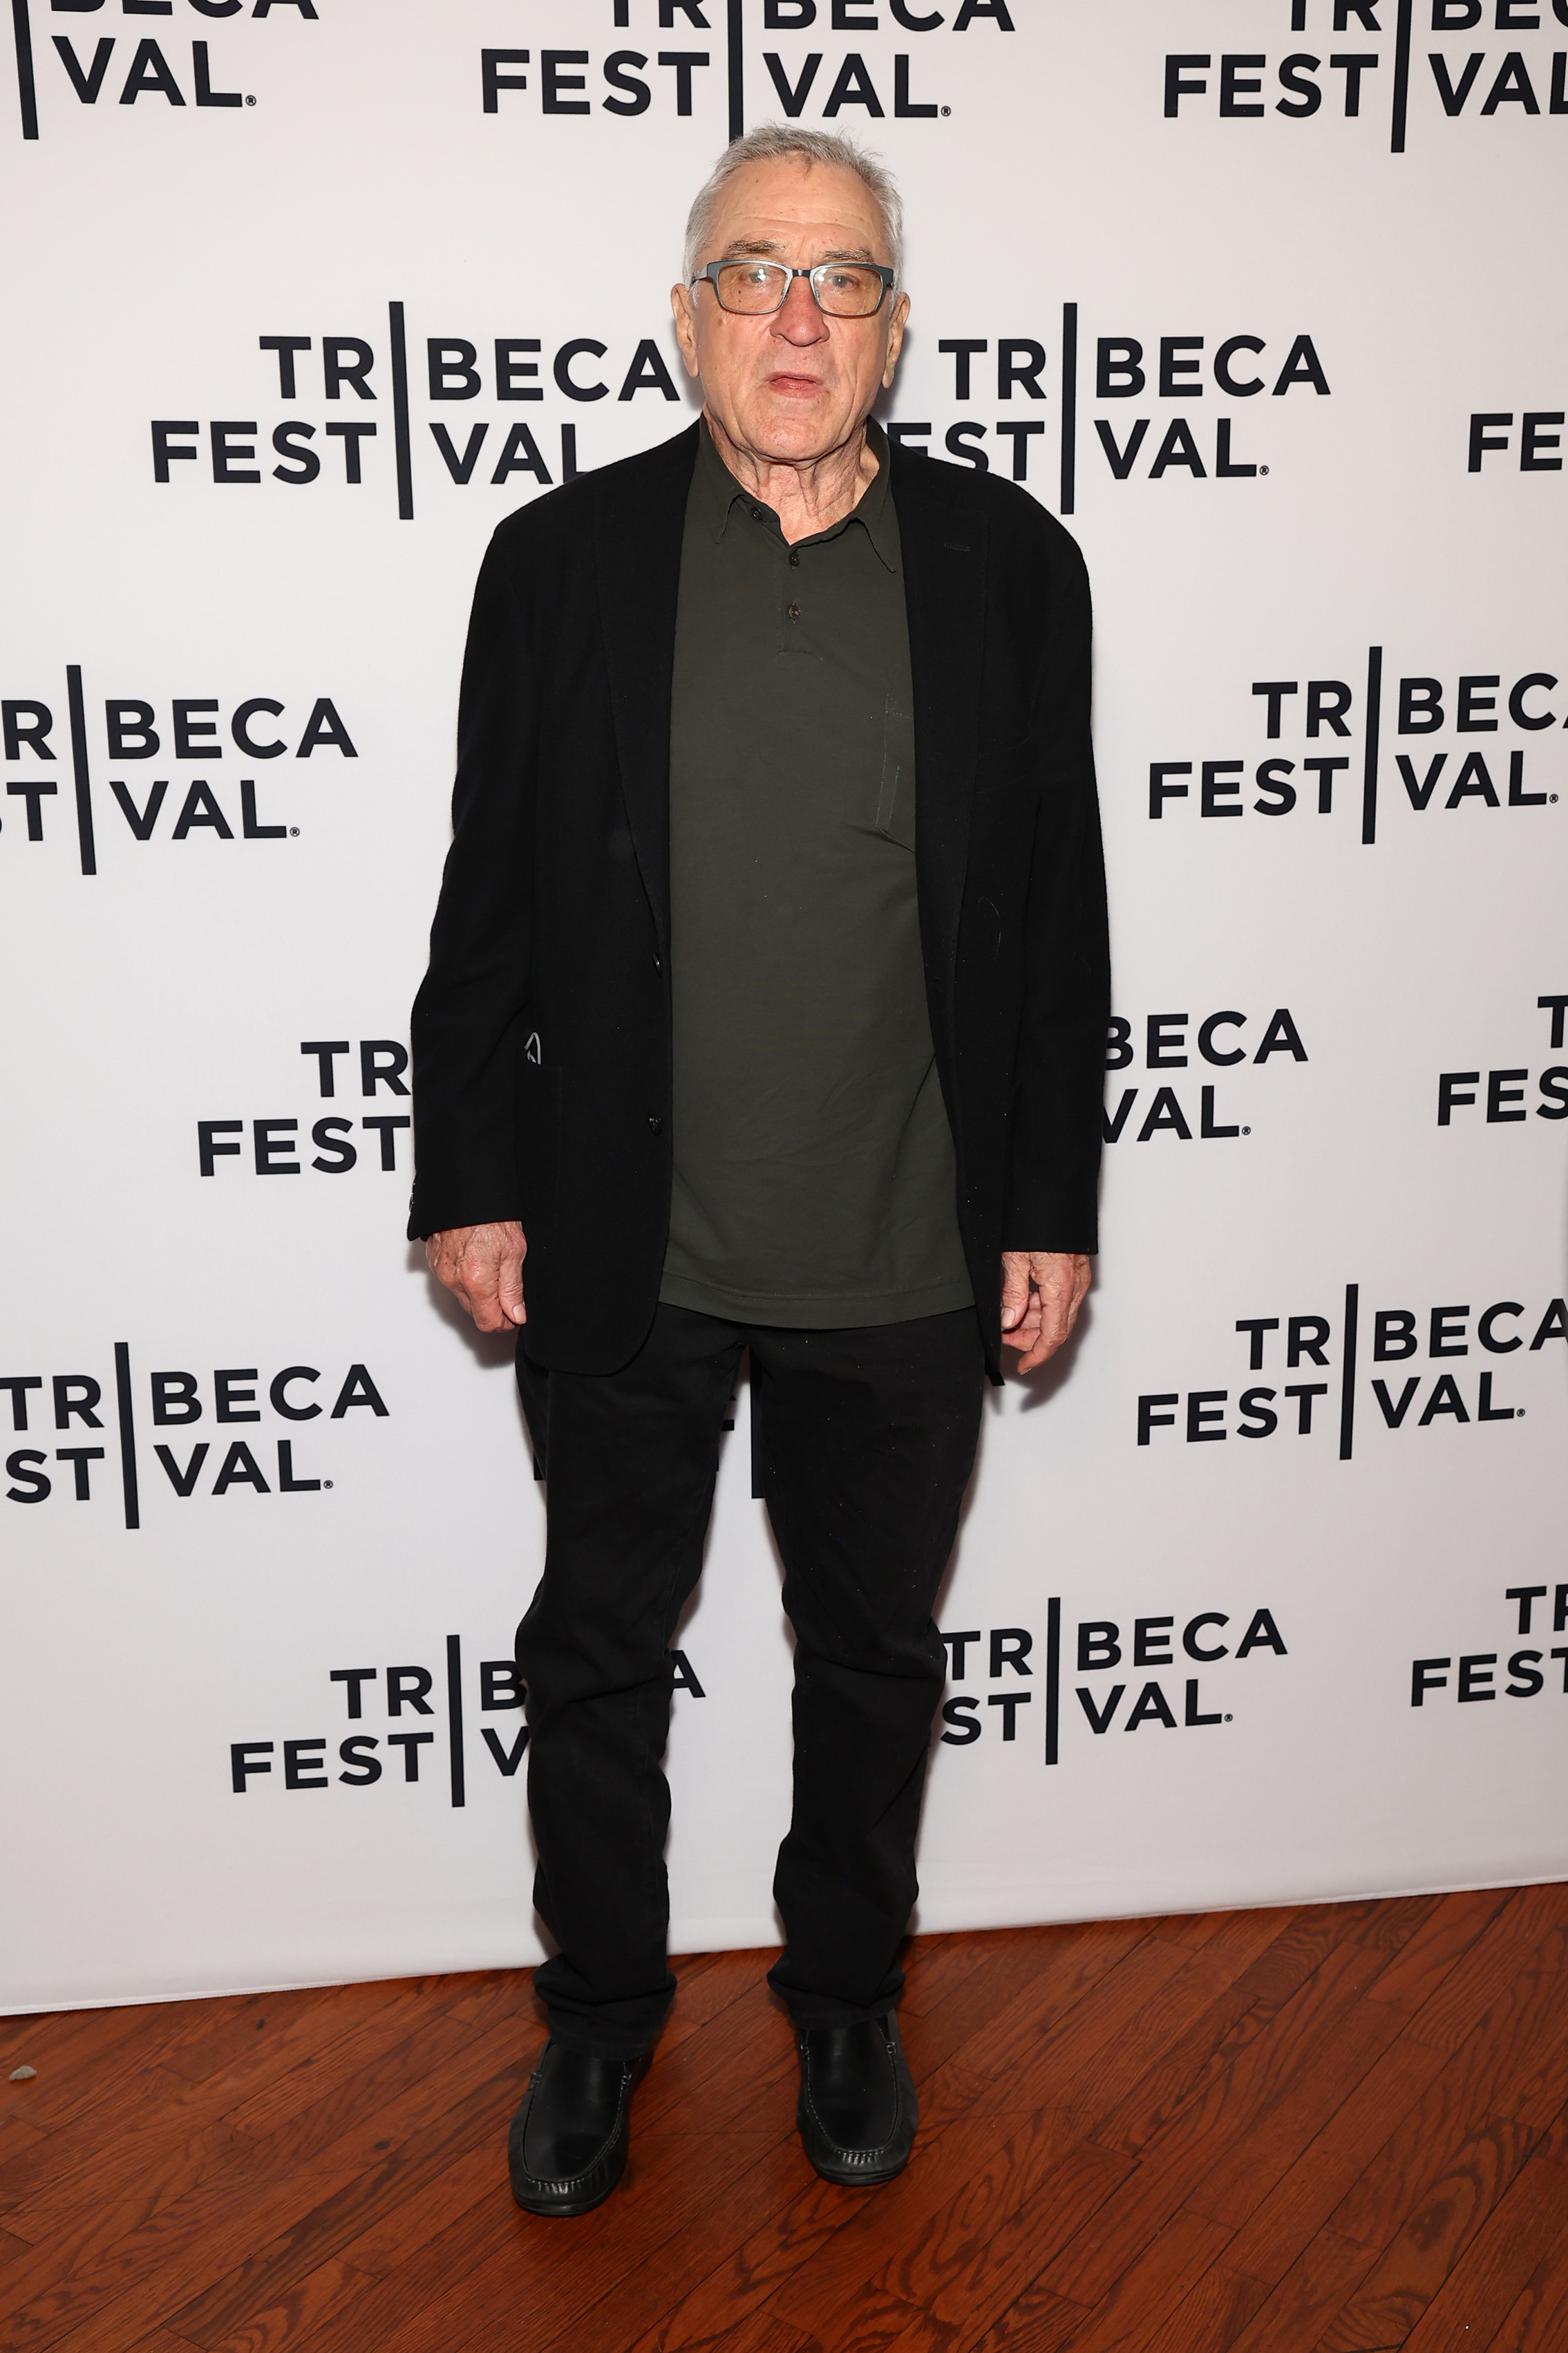 NEW YORK, NEW YORK - JUNE 07: Robert De Niro attends the Tribeca Festival opening night reception at Tribeca Grill on June 07, 2023 in New York City. (Photo by Arturo Holmes/Getty Images for Tribeca Festival)